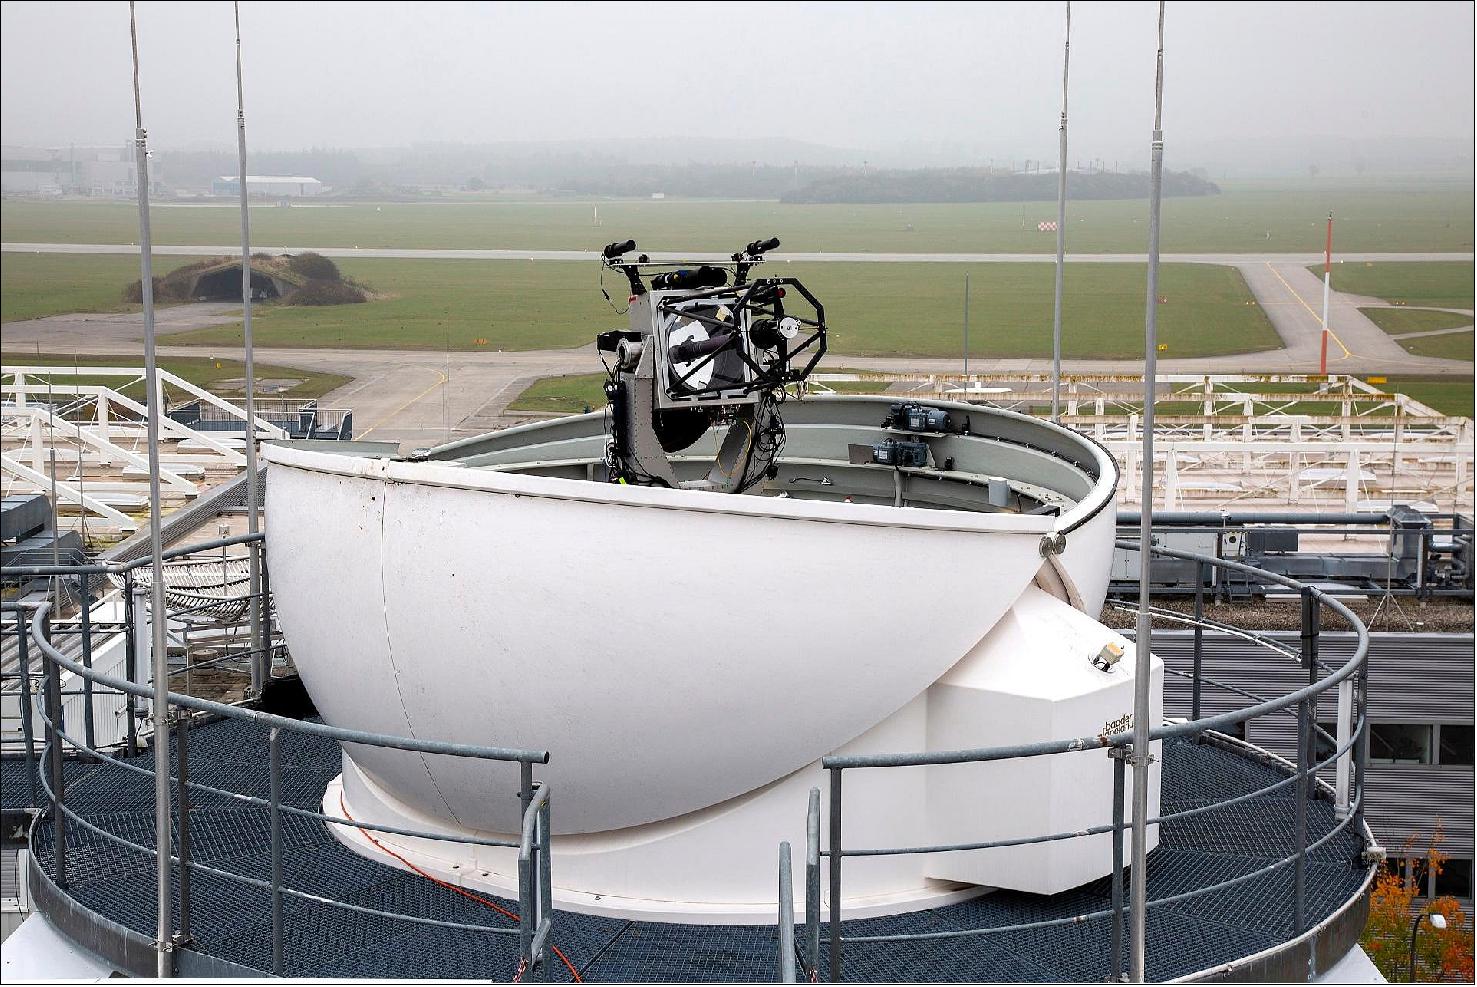 Figure 8: Optical ground station with opened dome at DLR Oberpfaffenhofen, mounted on the roof of the IKN building (image credit: DLR)